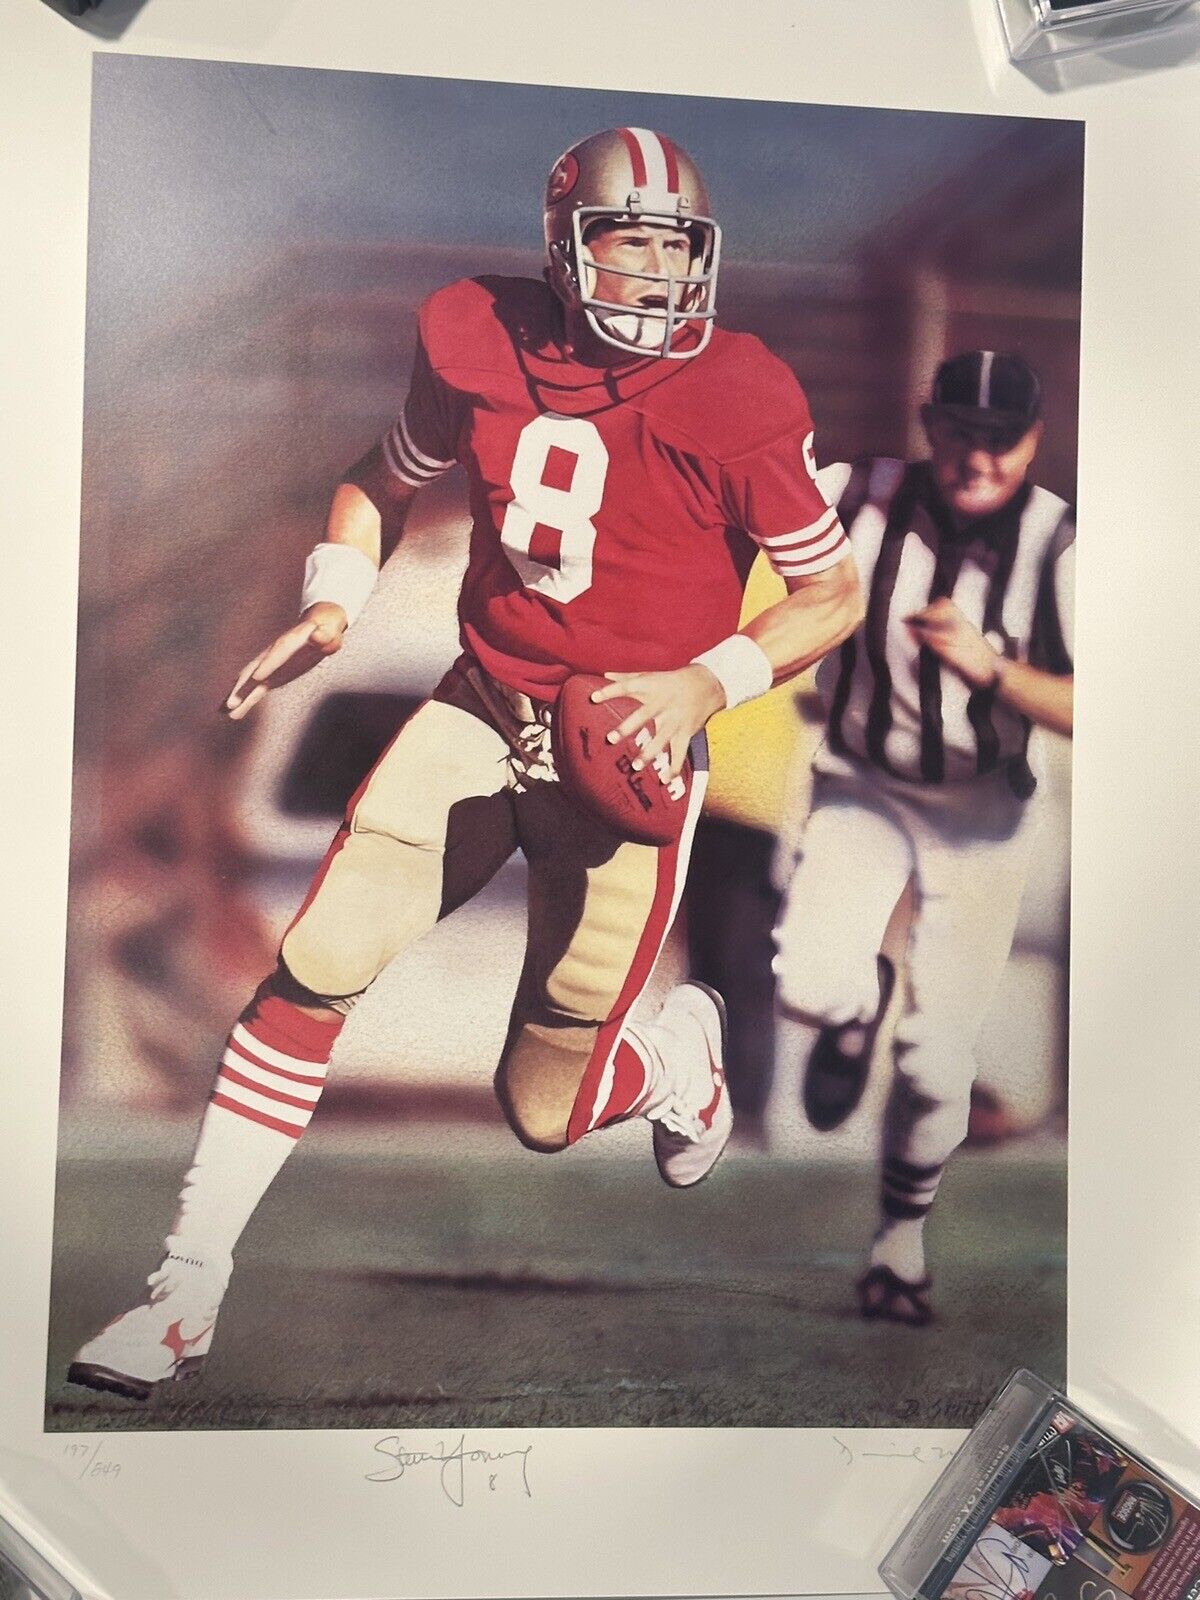 1992 Steve Young Signed Run and Shoot Ltd Ed #197/849 Danile M Smith Litograph